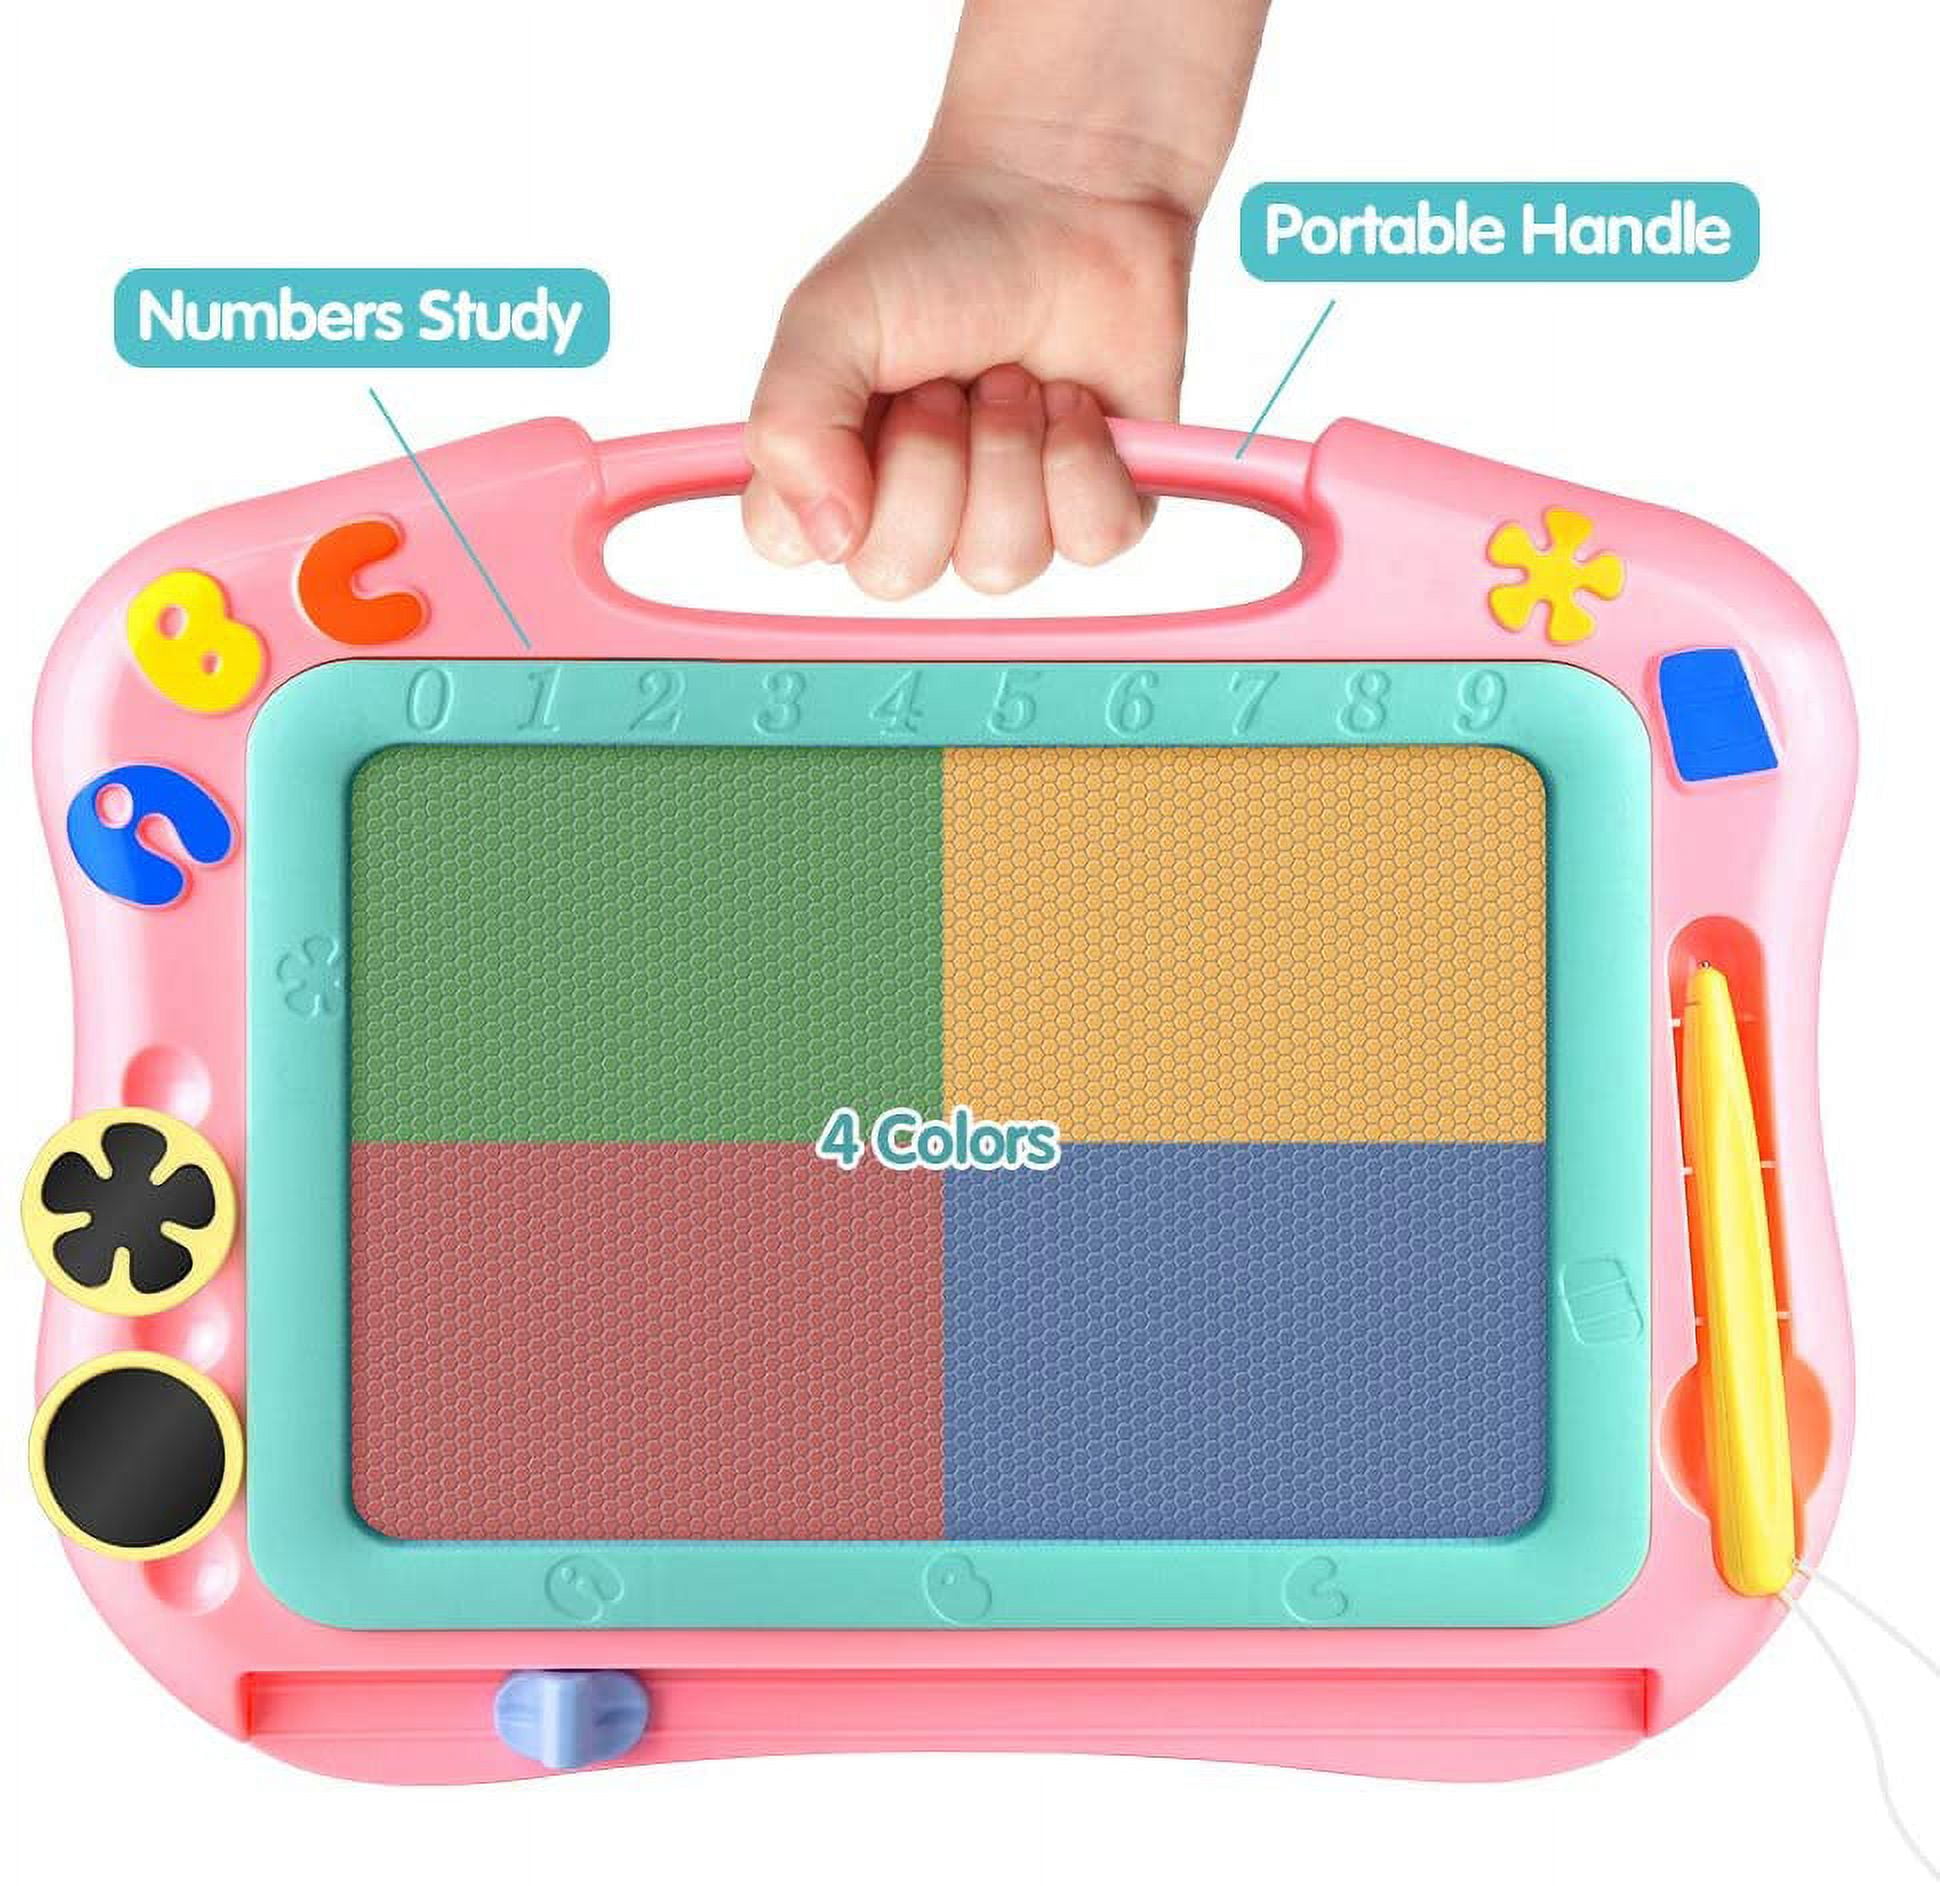 NEW Playz Electric Drawing Kit 4 Kids-Motorized DIY Doodle Board Ages 8-12  STEM